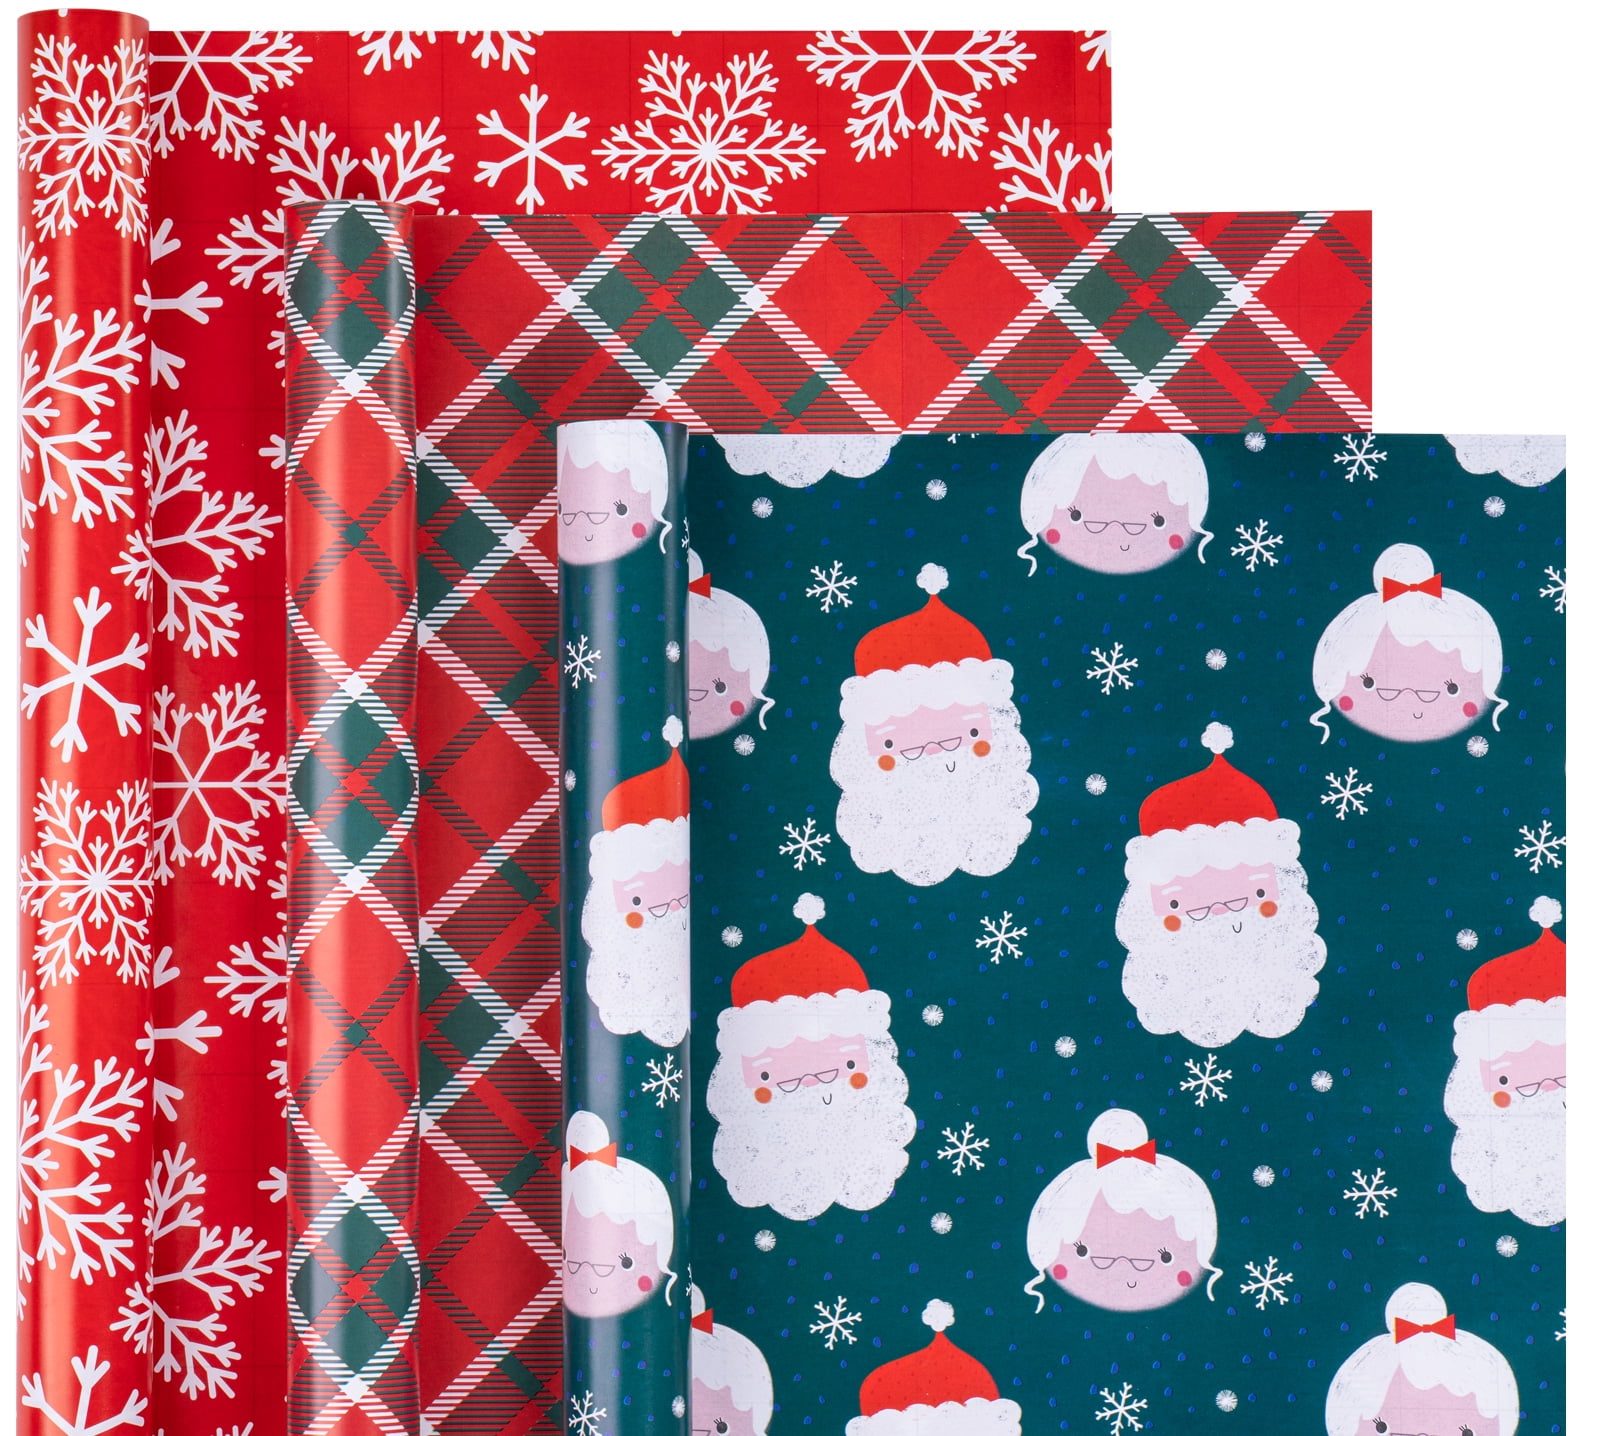 WRAPAHOLIC Reversible Christmas Wrapping Paper - Mini Roll - 17 Inch X 33  Feet - Green Santa Claus and Stripe Design for Chrsitmas, Holiday, Party